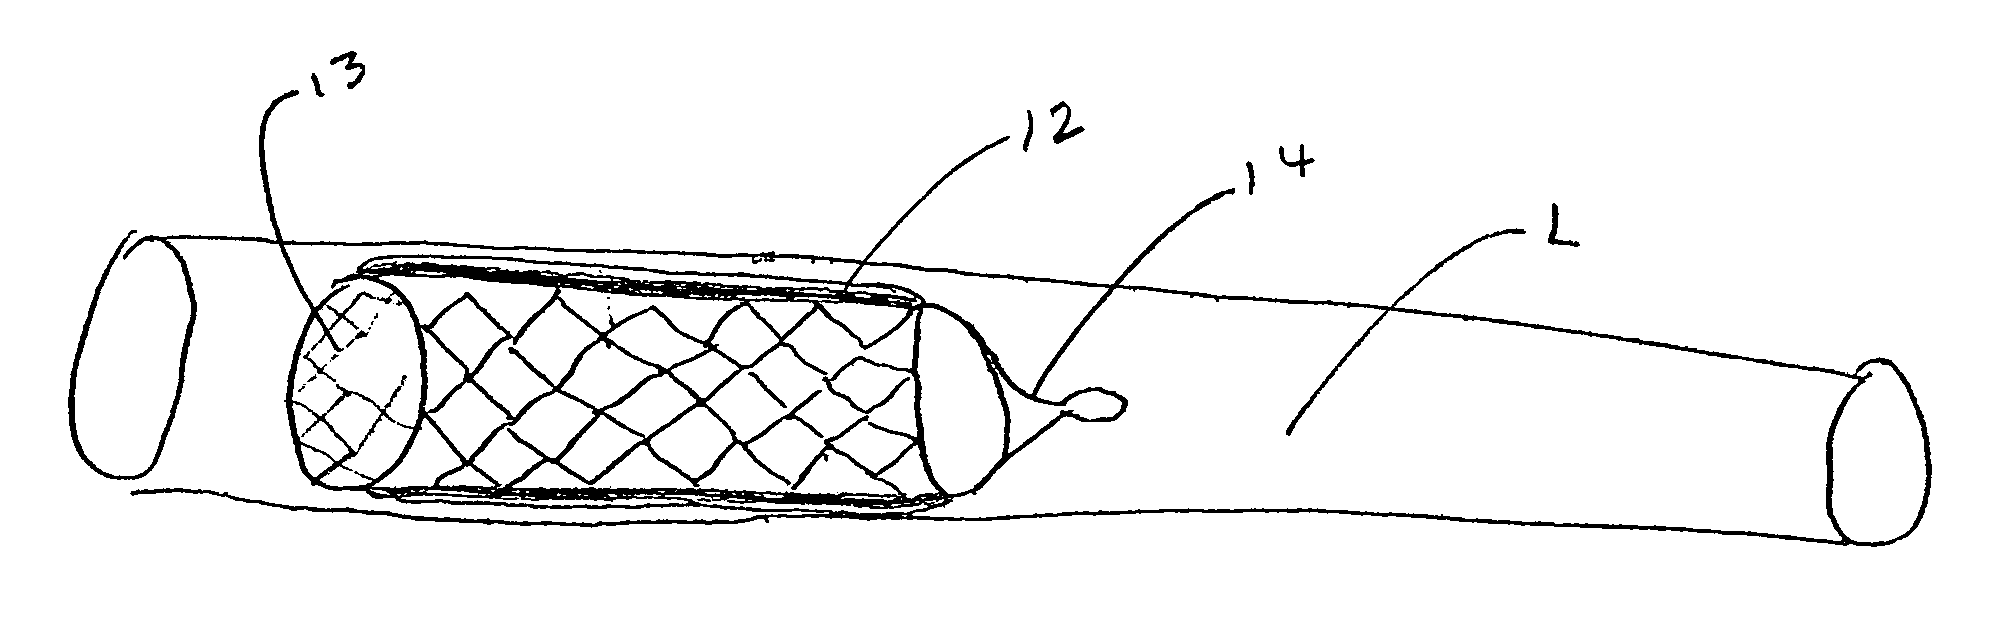 Implantable systems and stents containing cells for therapeutic uses